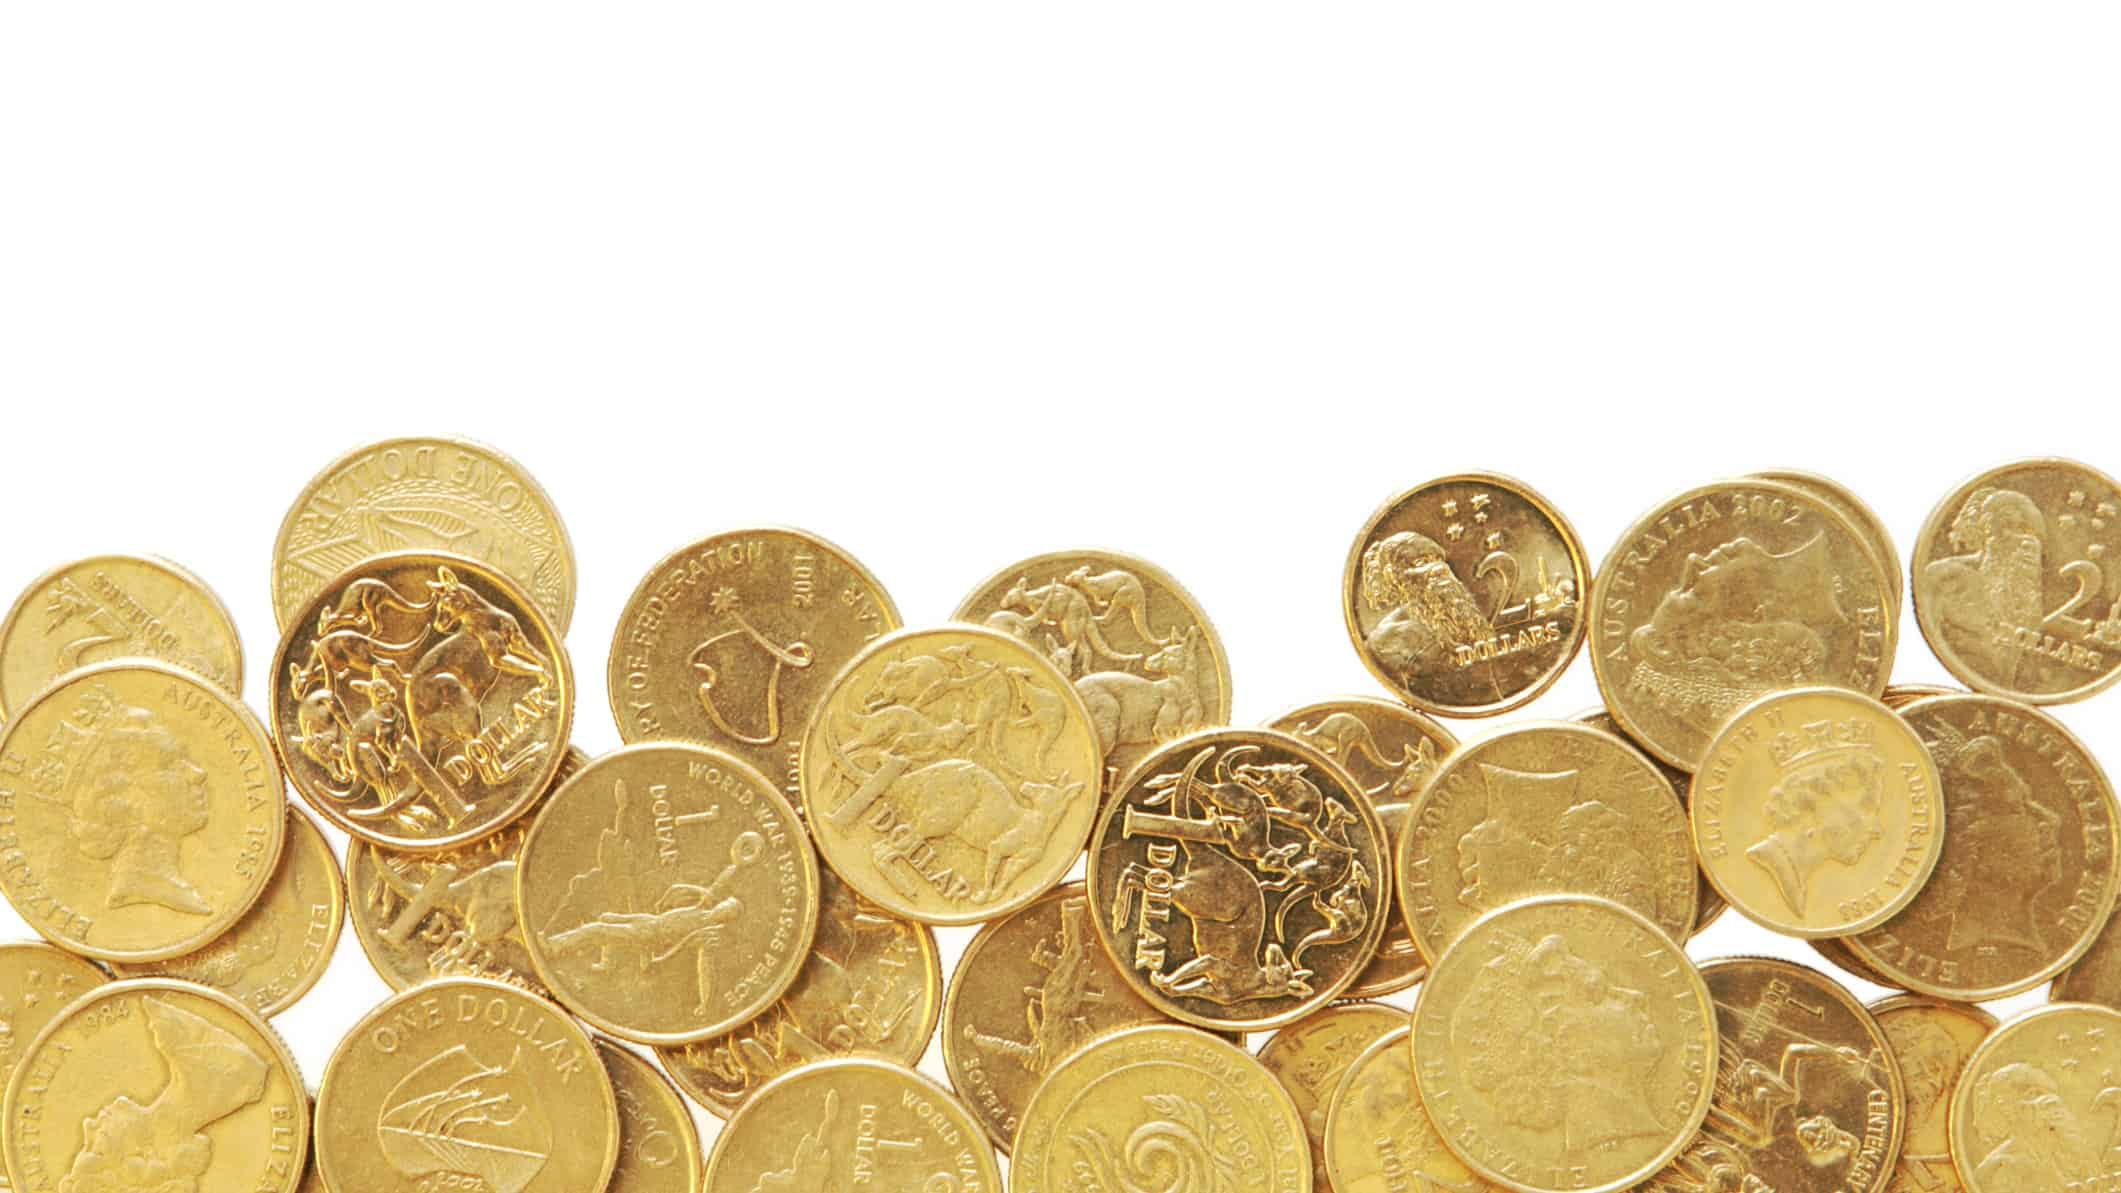 bargain stocks represented by one and two dollars coins in a pile